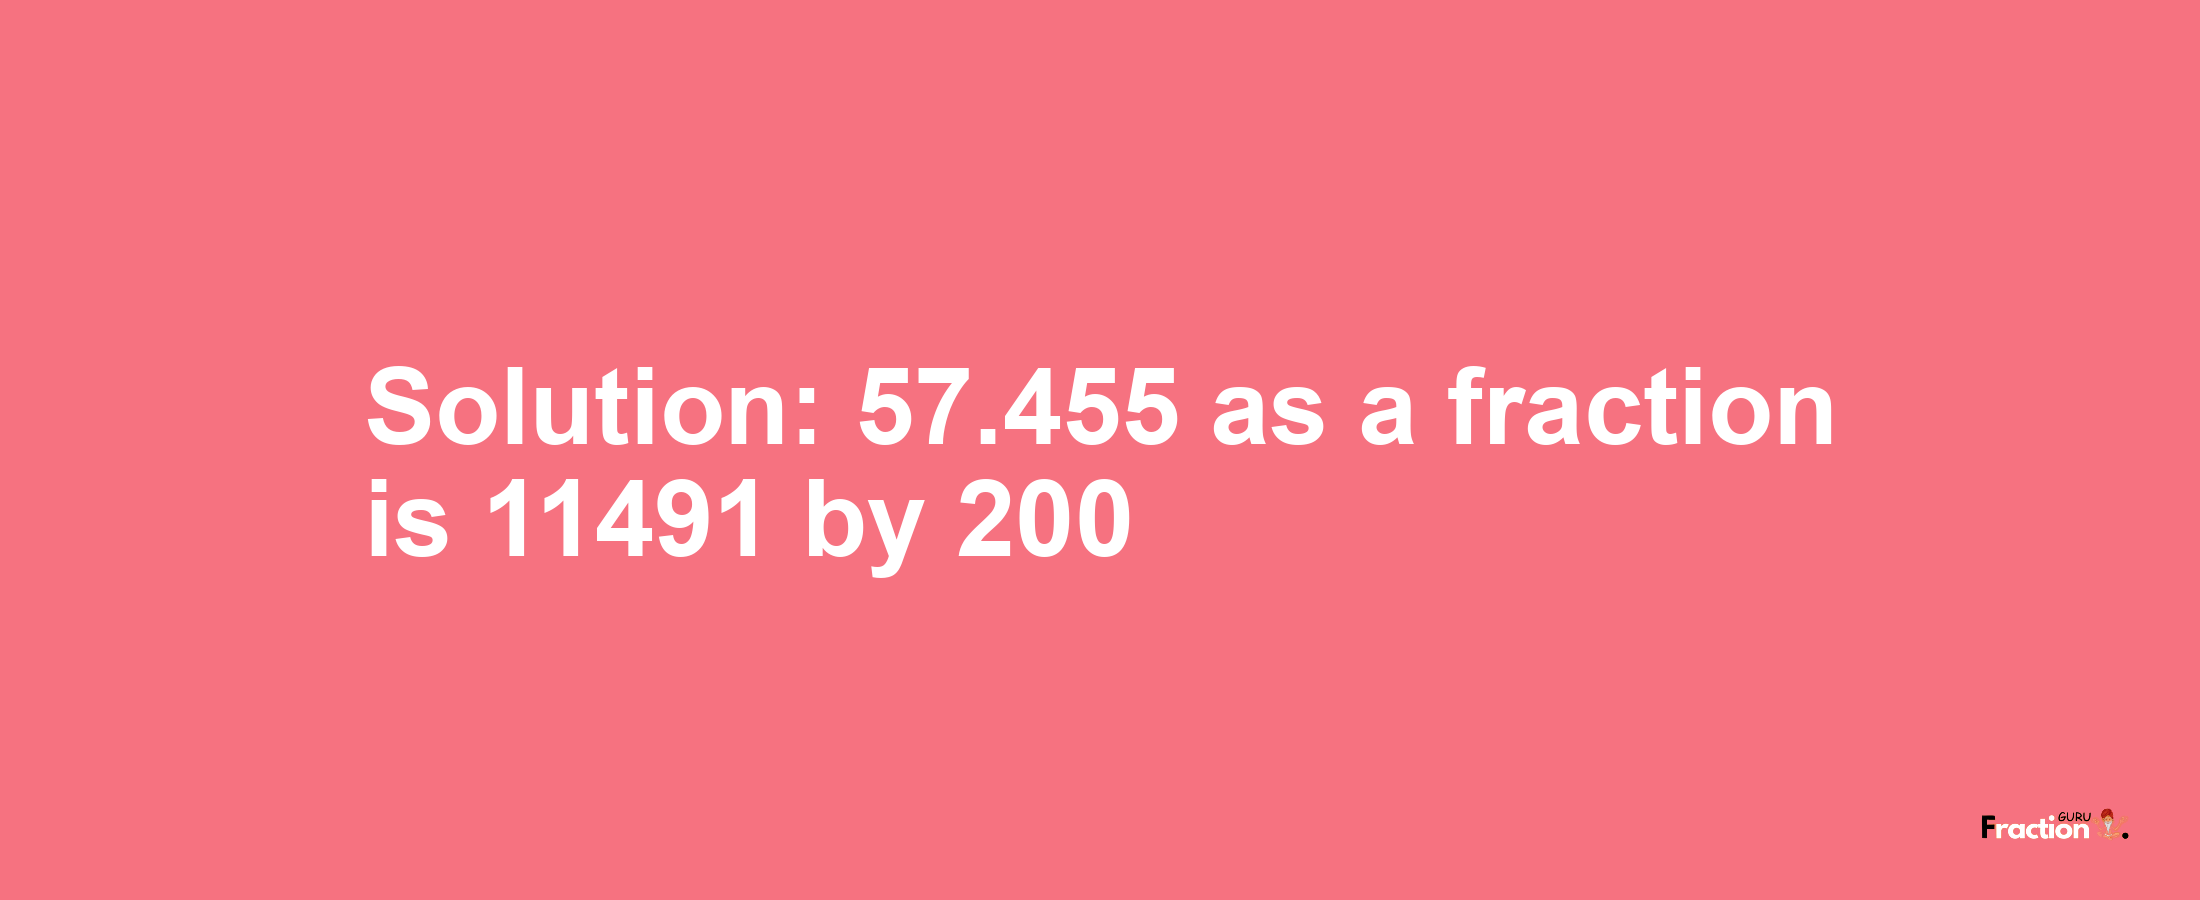 Solution:57.455 as a fraction is 11491/200